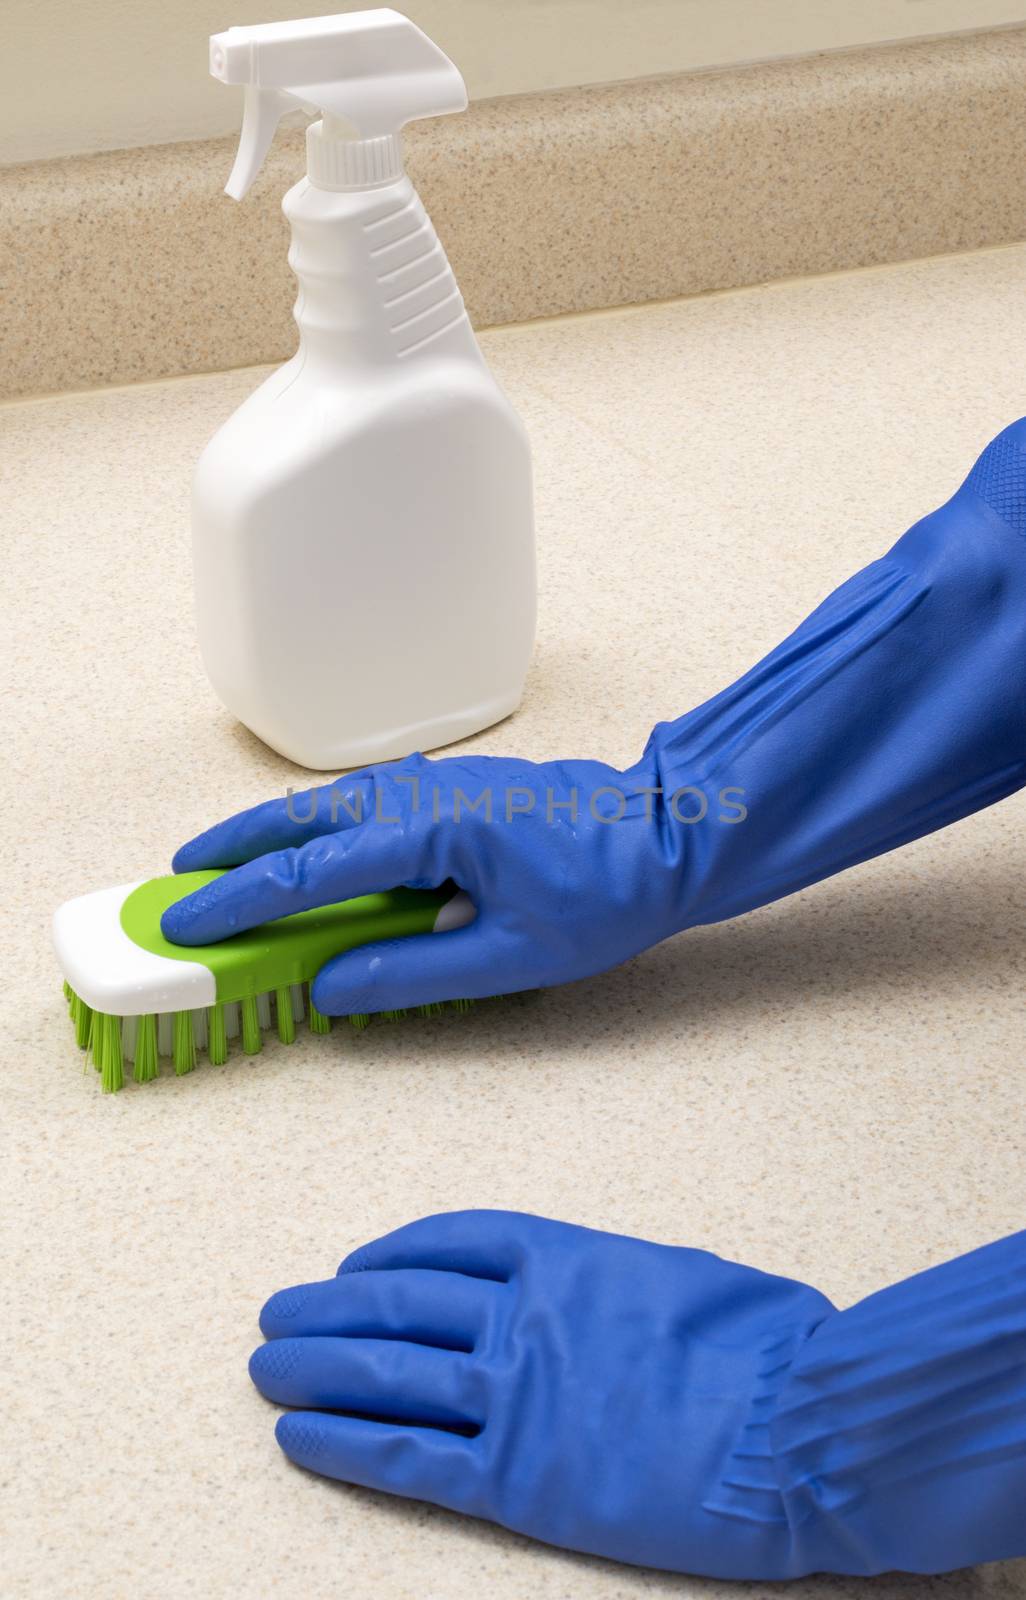 Hands wearing blue rubber latex gloves cleaning counter top with scrub brush and spray.